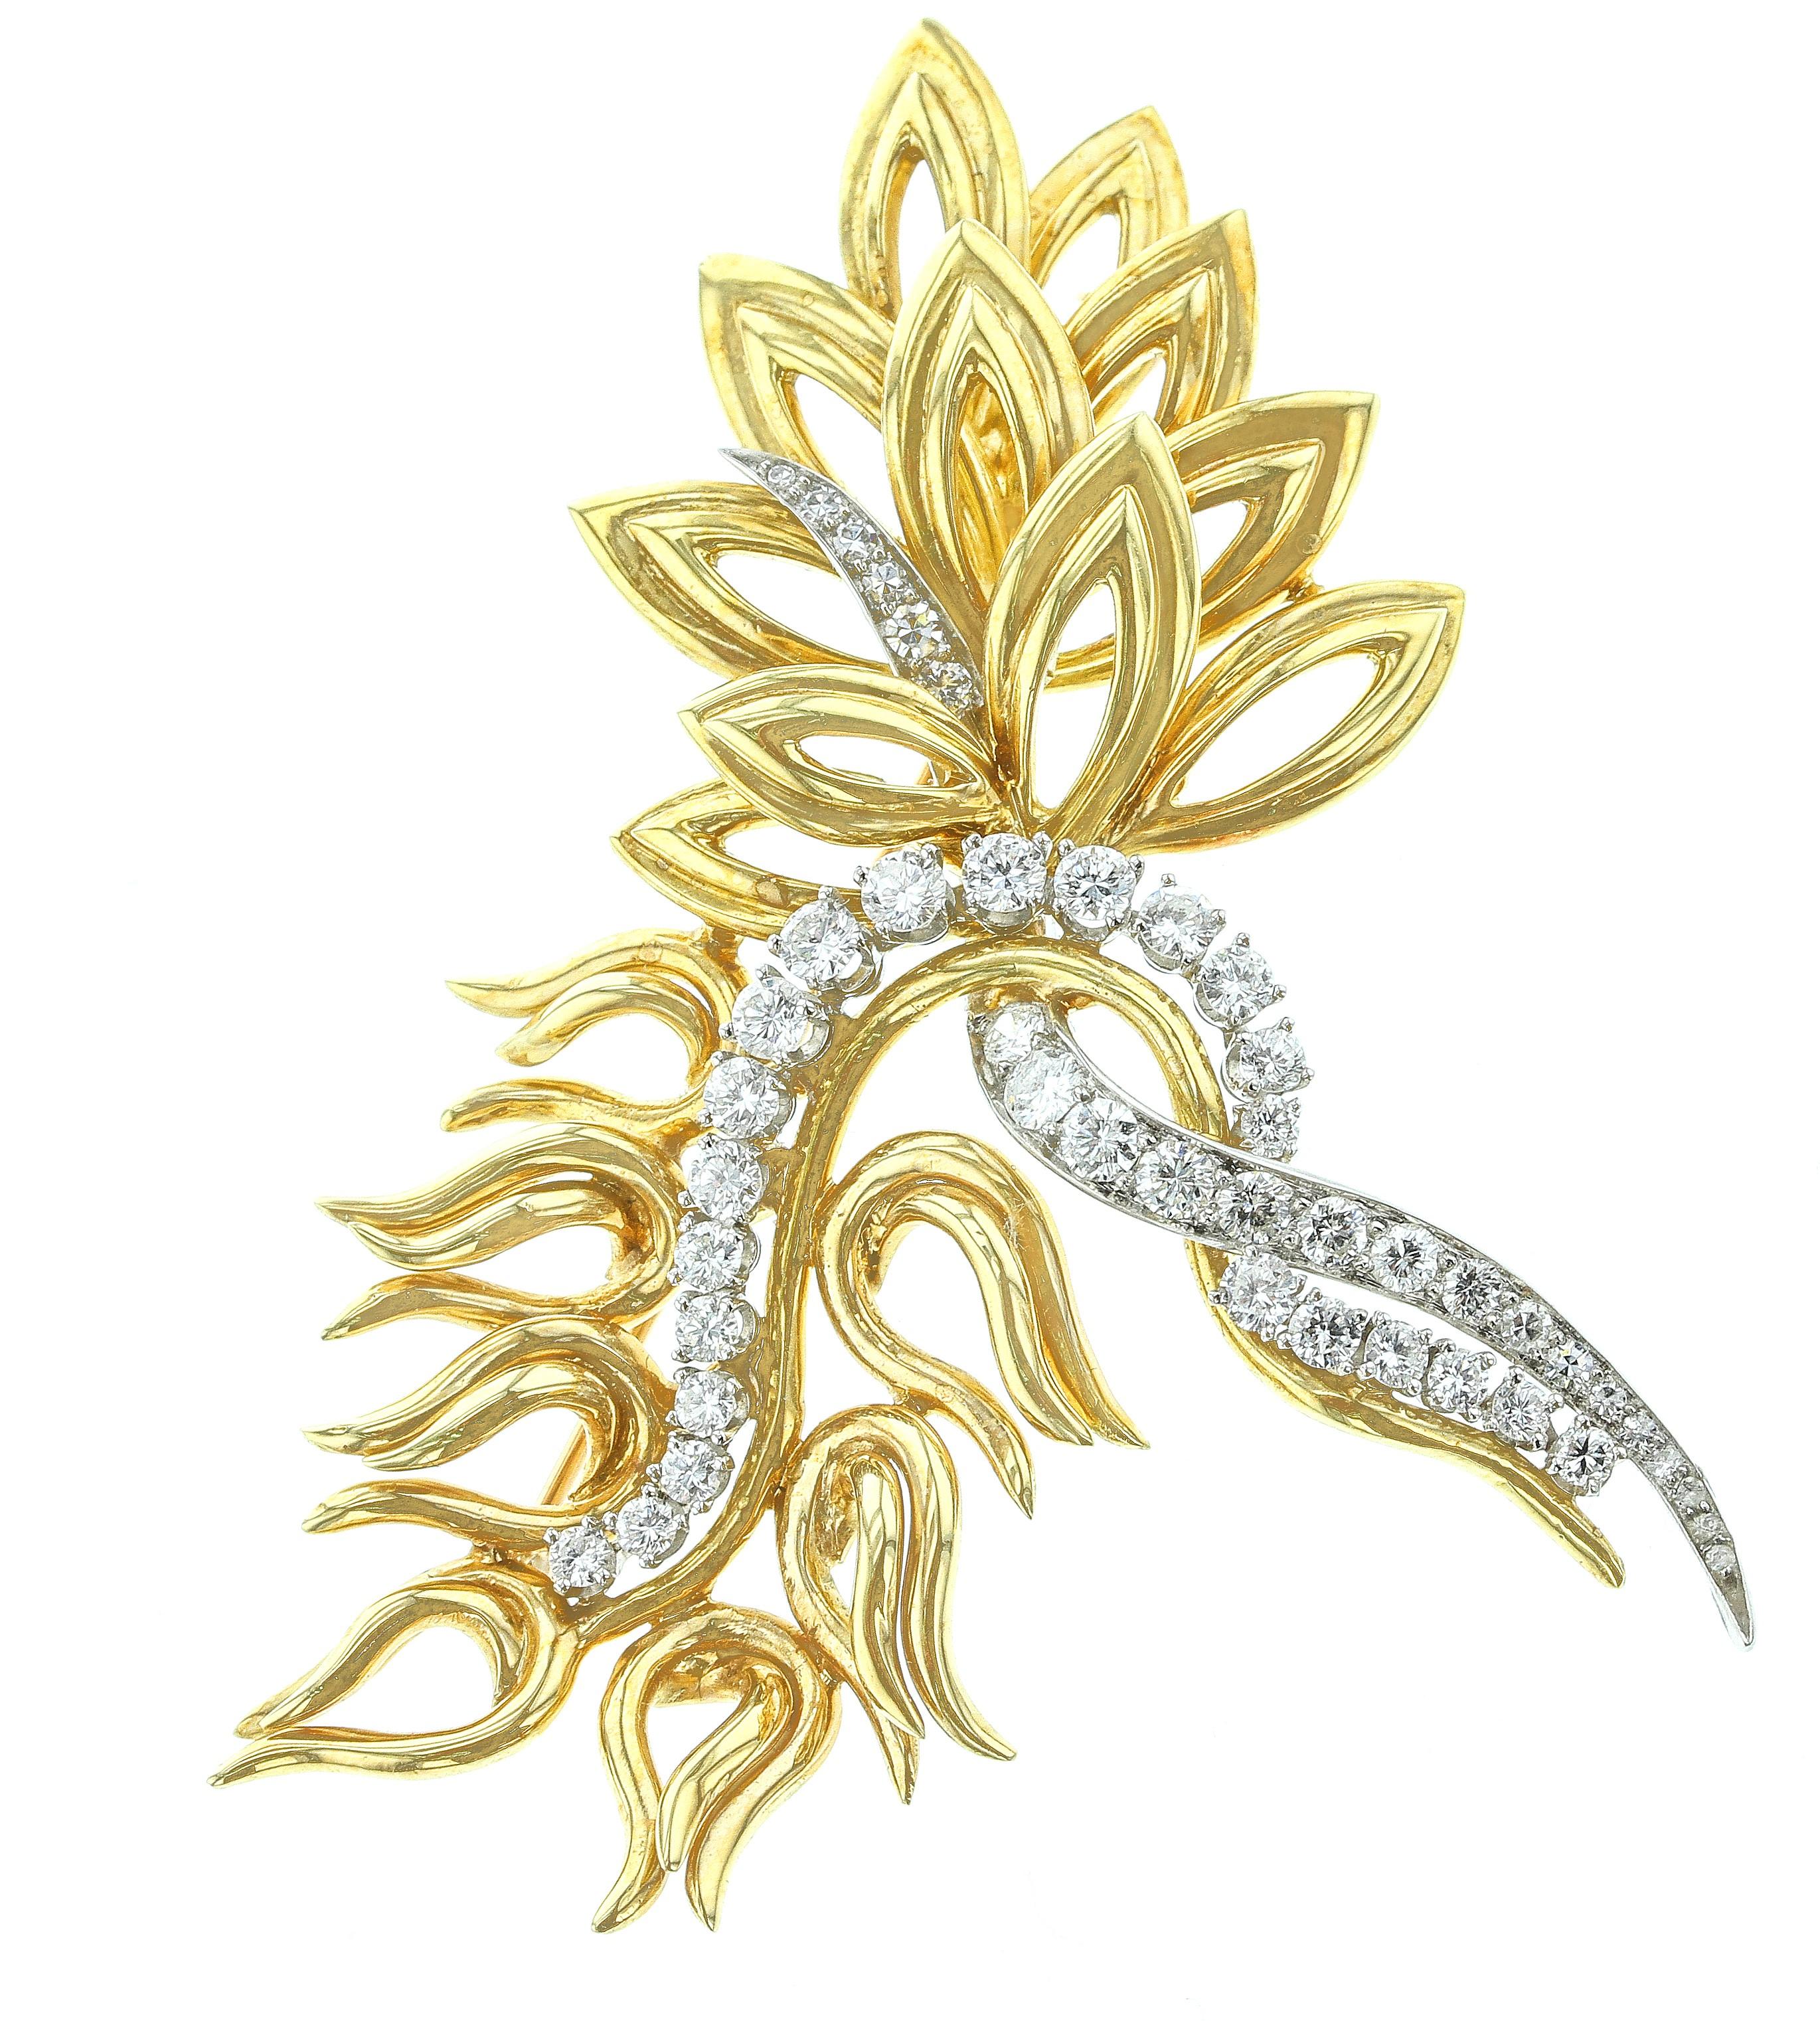 An abstract pin in 18K Yellow Gold and Platinum, set with Diamonds. Circa 1960, Retailed by Harry Winston. Length: 2